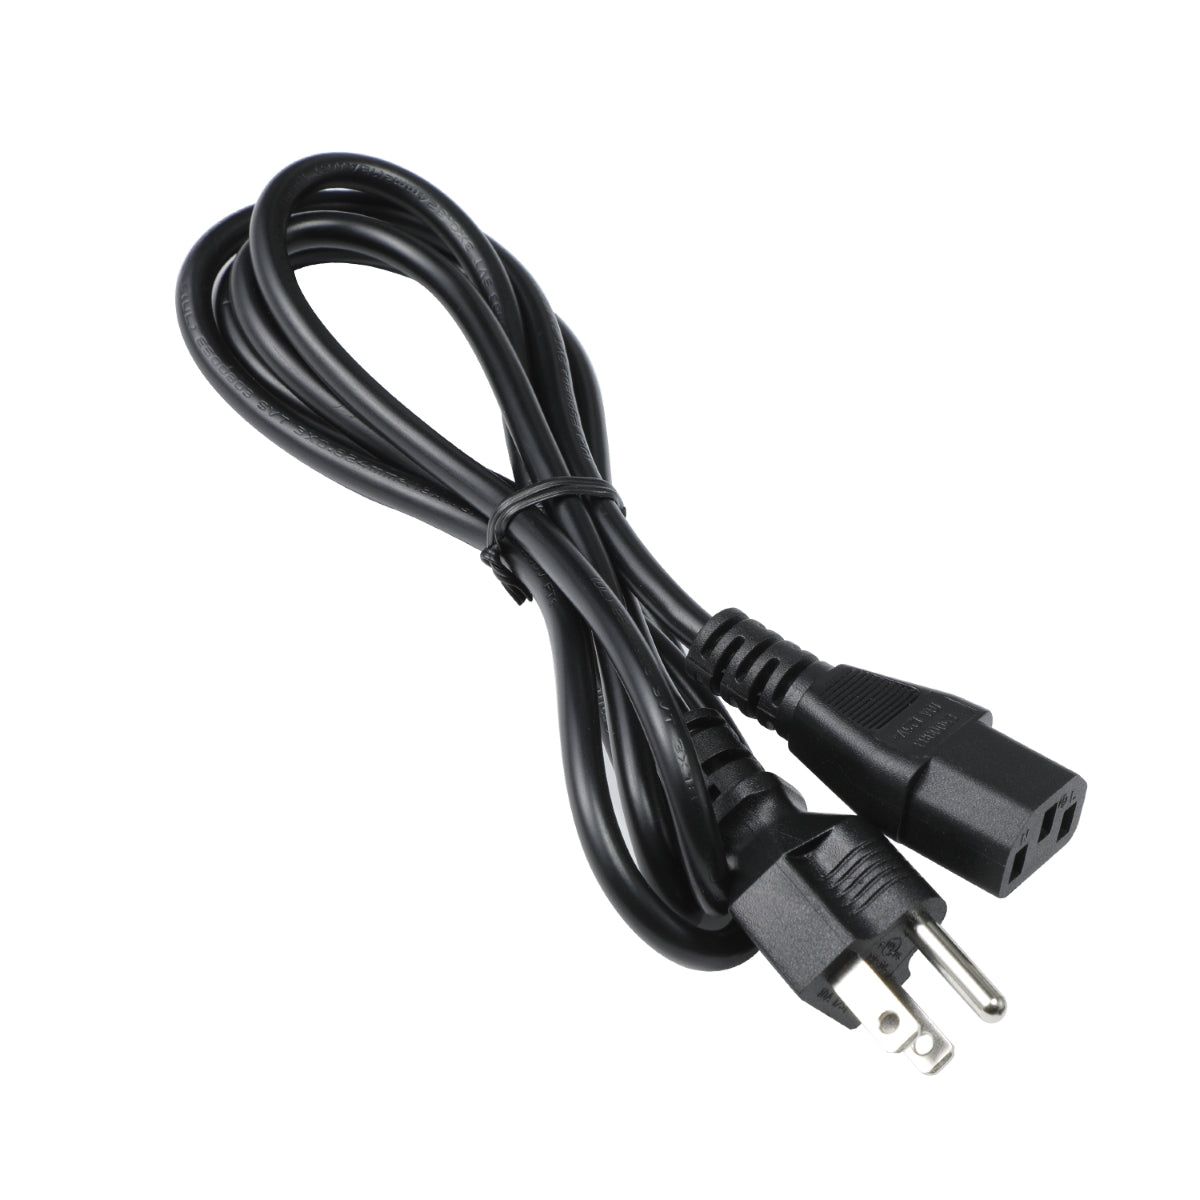 Power Cord for ViewSonic VP2768 Monitor